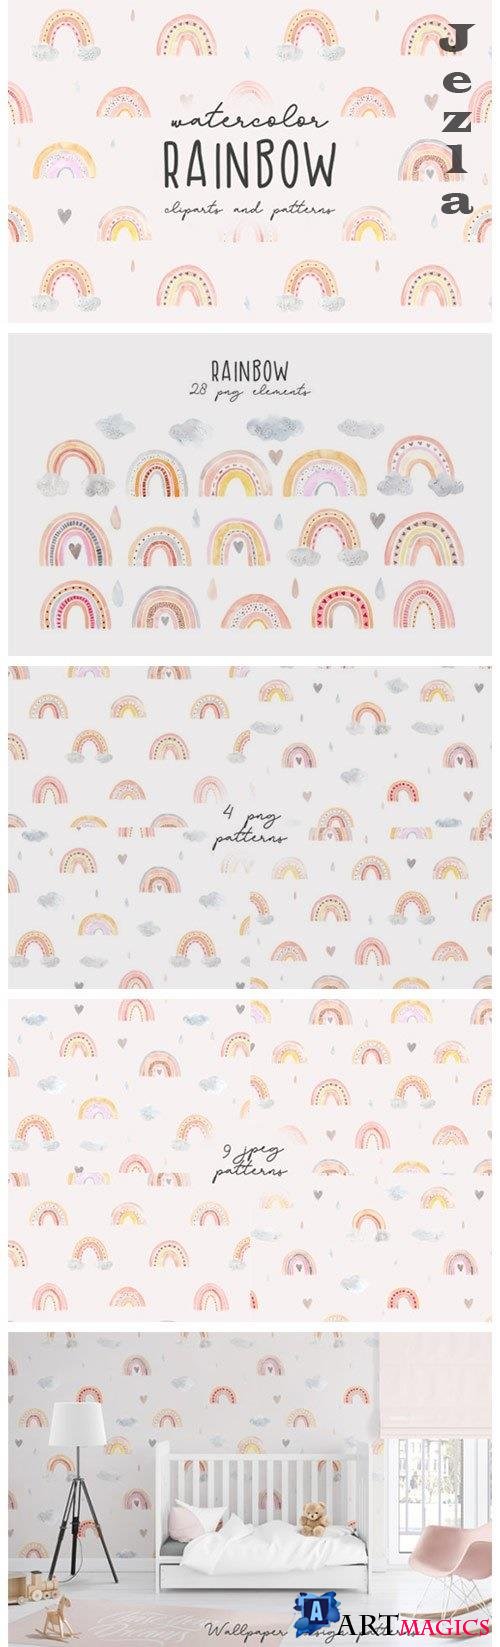 Watercolor Rainbow. Clipart Patterns - 4364553